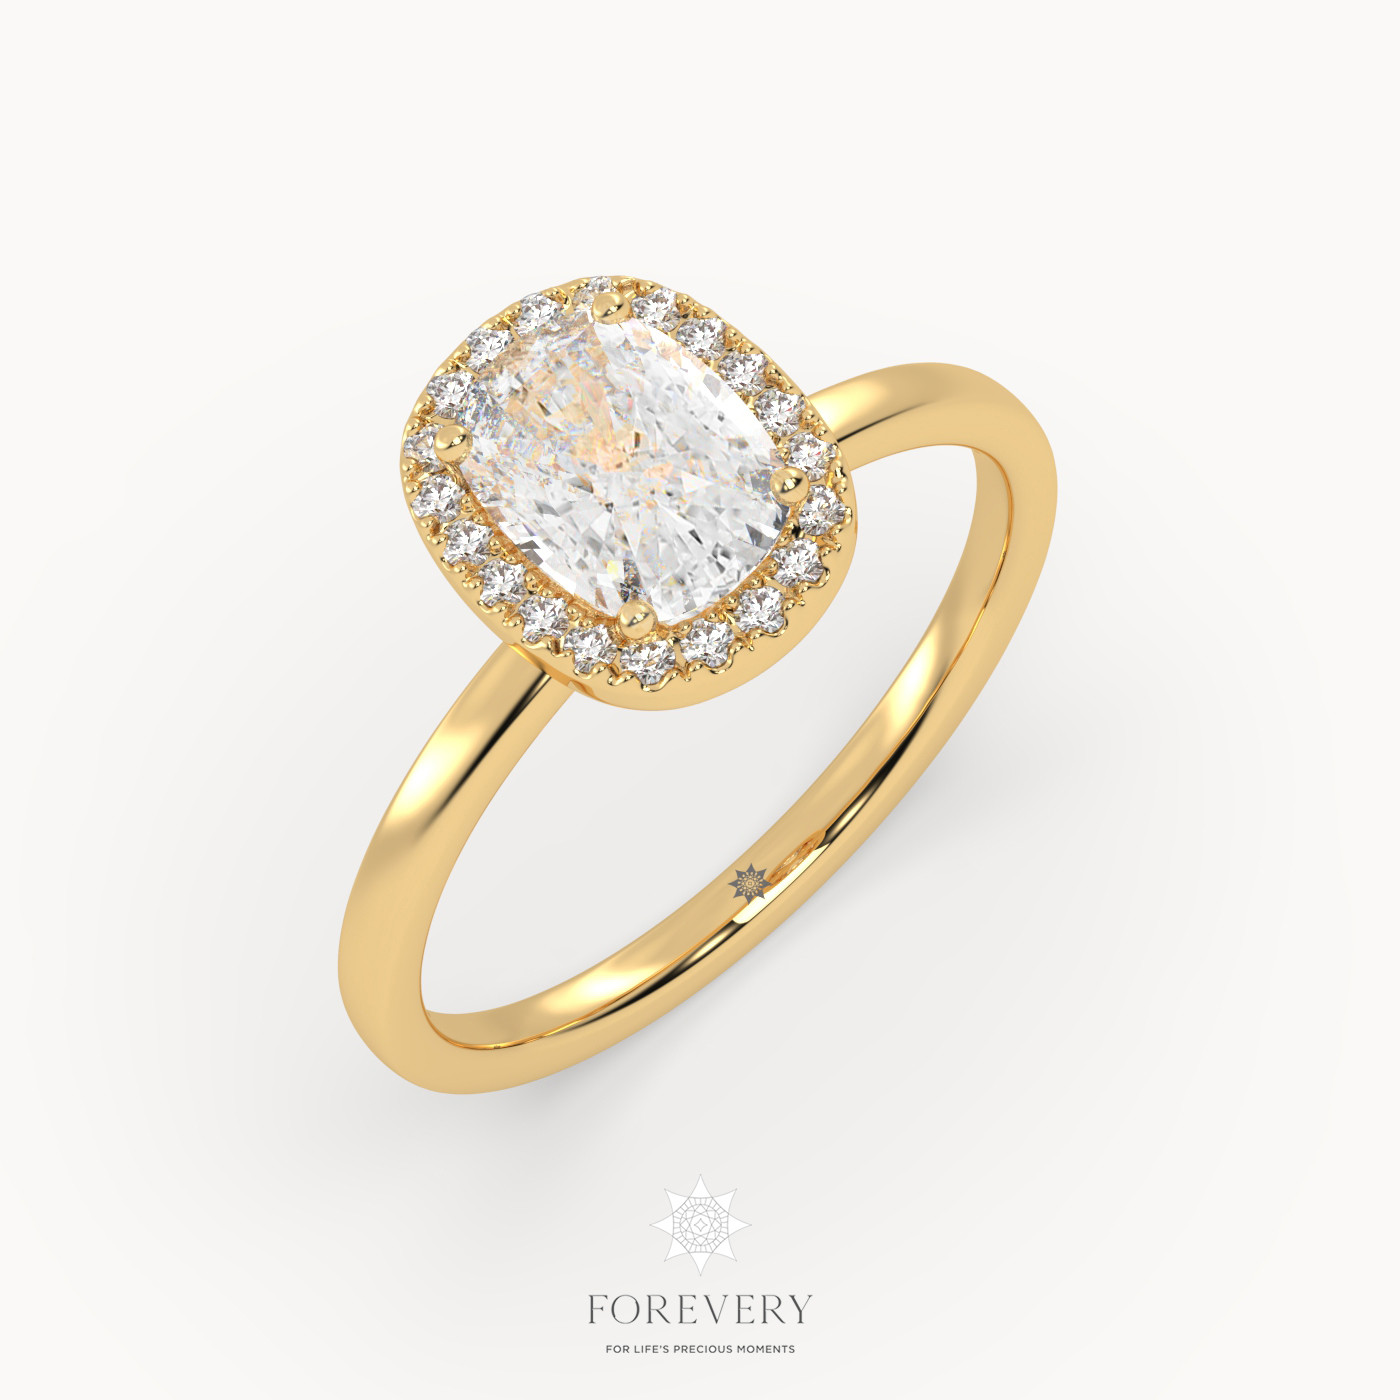 18K YELLOW GOLD Halo Style Solitaire Engagement Ring